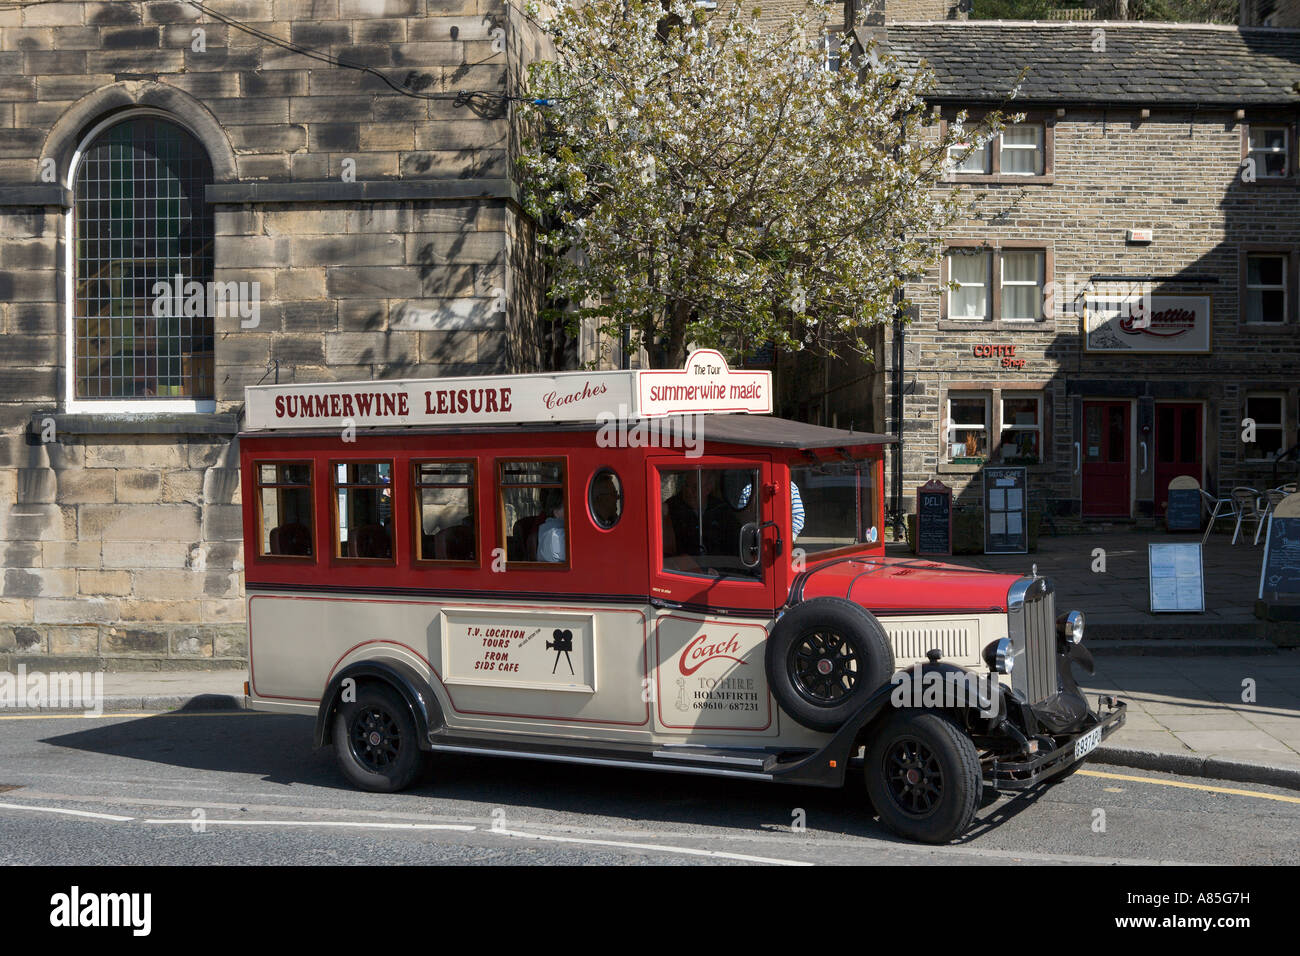 Coffee Shop and Summerwine Tour Vehicle, Holmfirth, West Yorkshire, England, UK Stock Photo